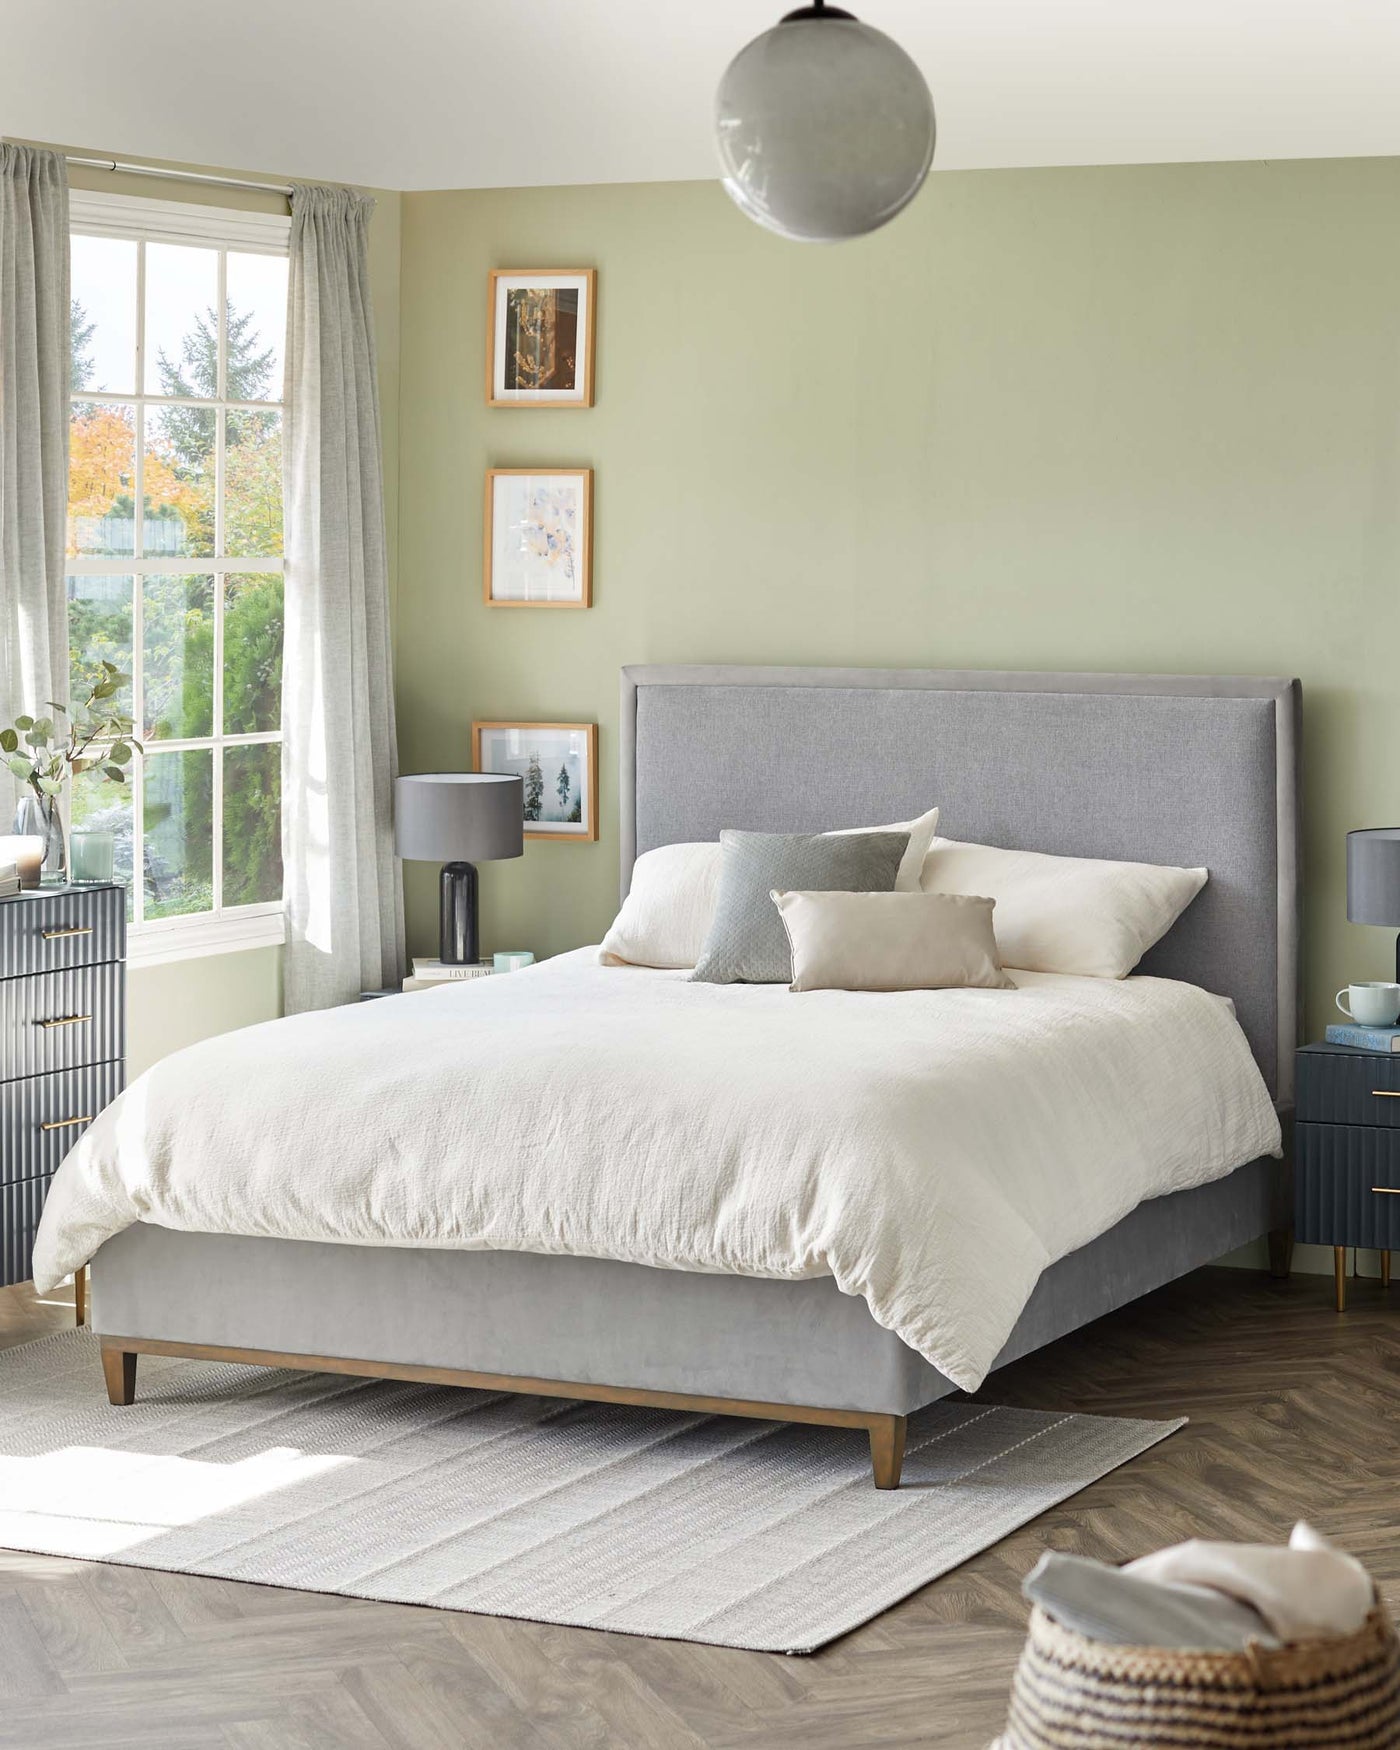 A modern bedroom featuring a grey upholstered platform bed with a high headboard and wooden legs, dressed with white and light grey bedding. A pair of round-top blue nightstands with gold handles flank the bed. The room has a large grey area rug under the bed and a woven basket on the floor to the right. A sleek black table lamp with a cylindrical shade sits atop one nightstand.